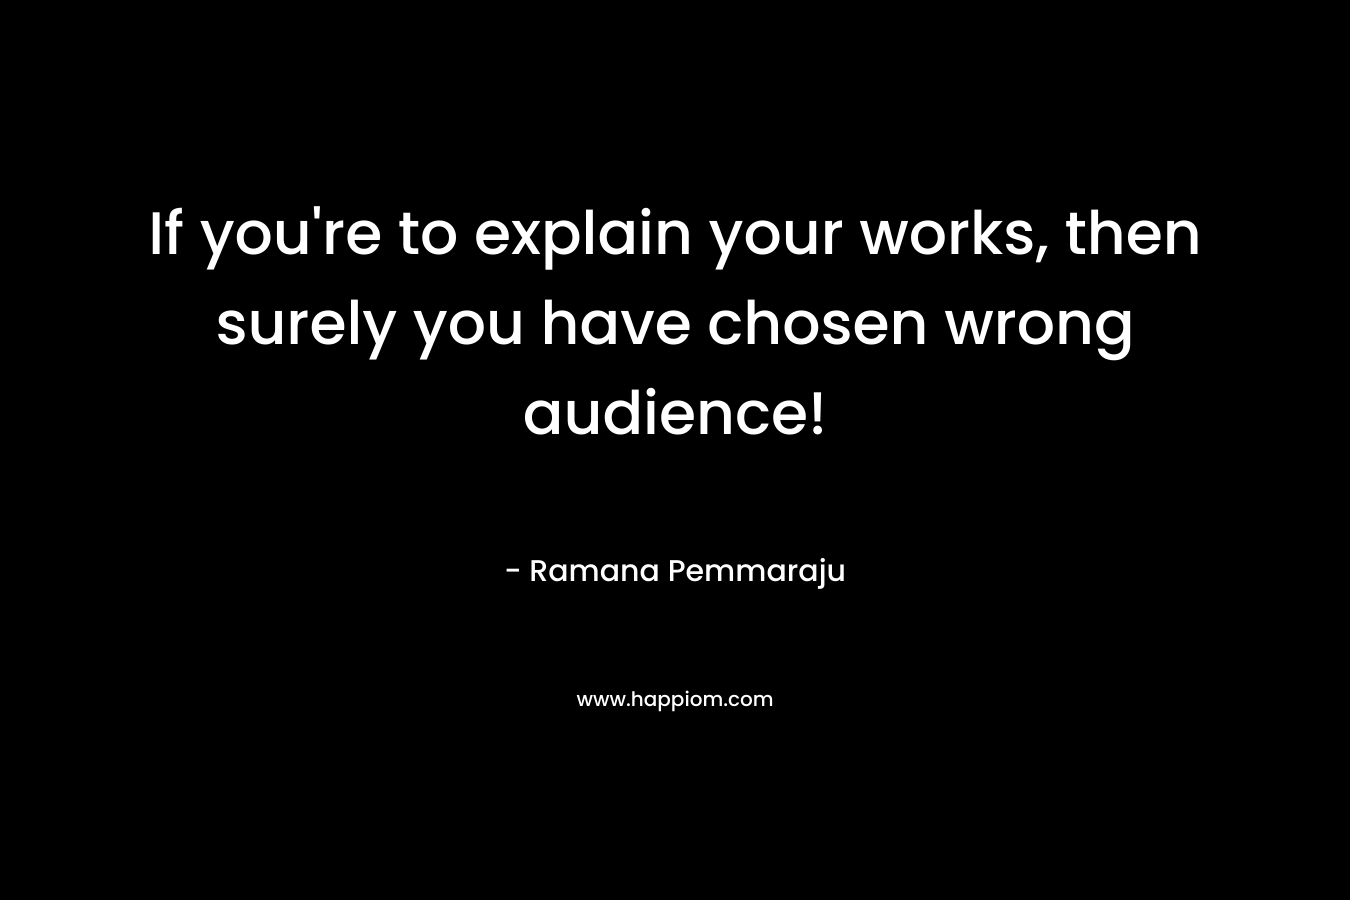 If you're to explain your works, then surely you have chosen wrong audience!